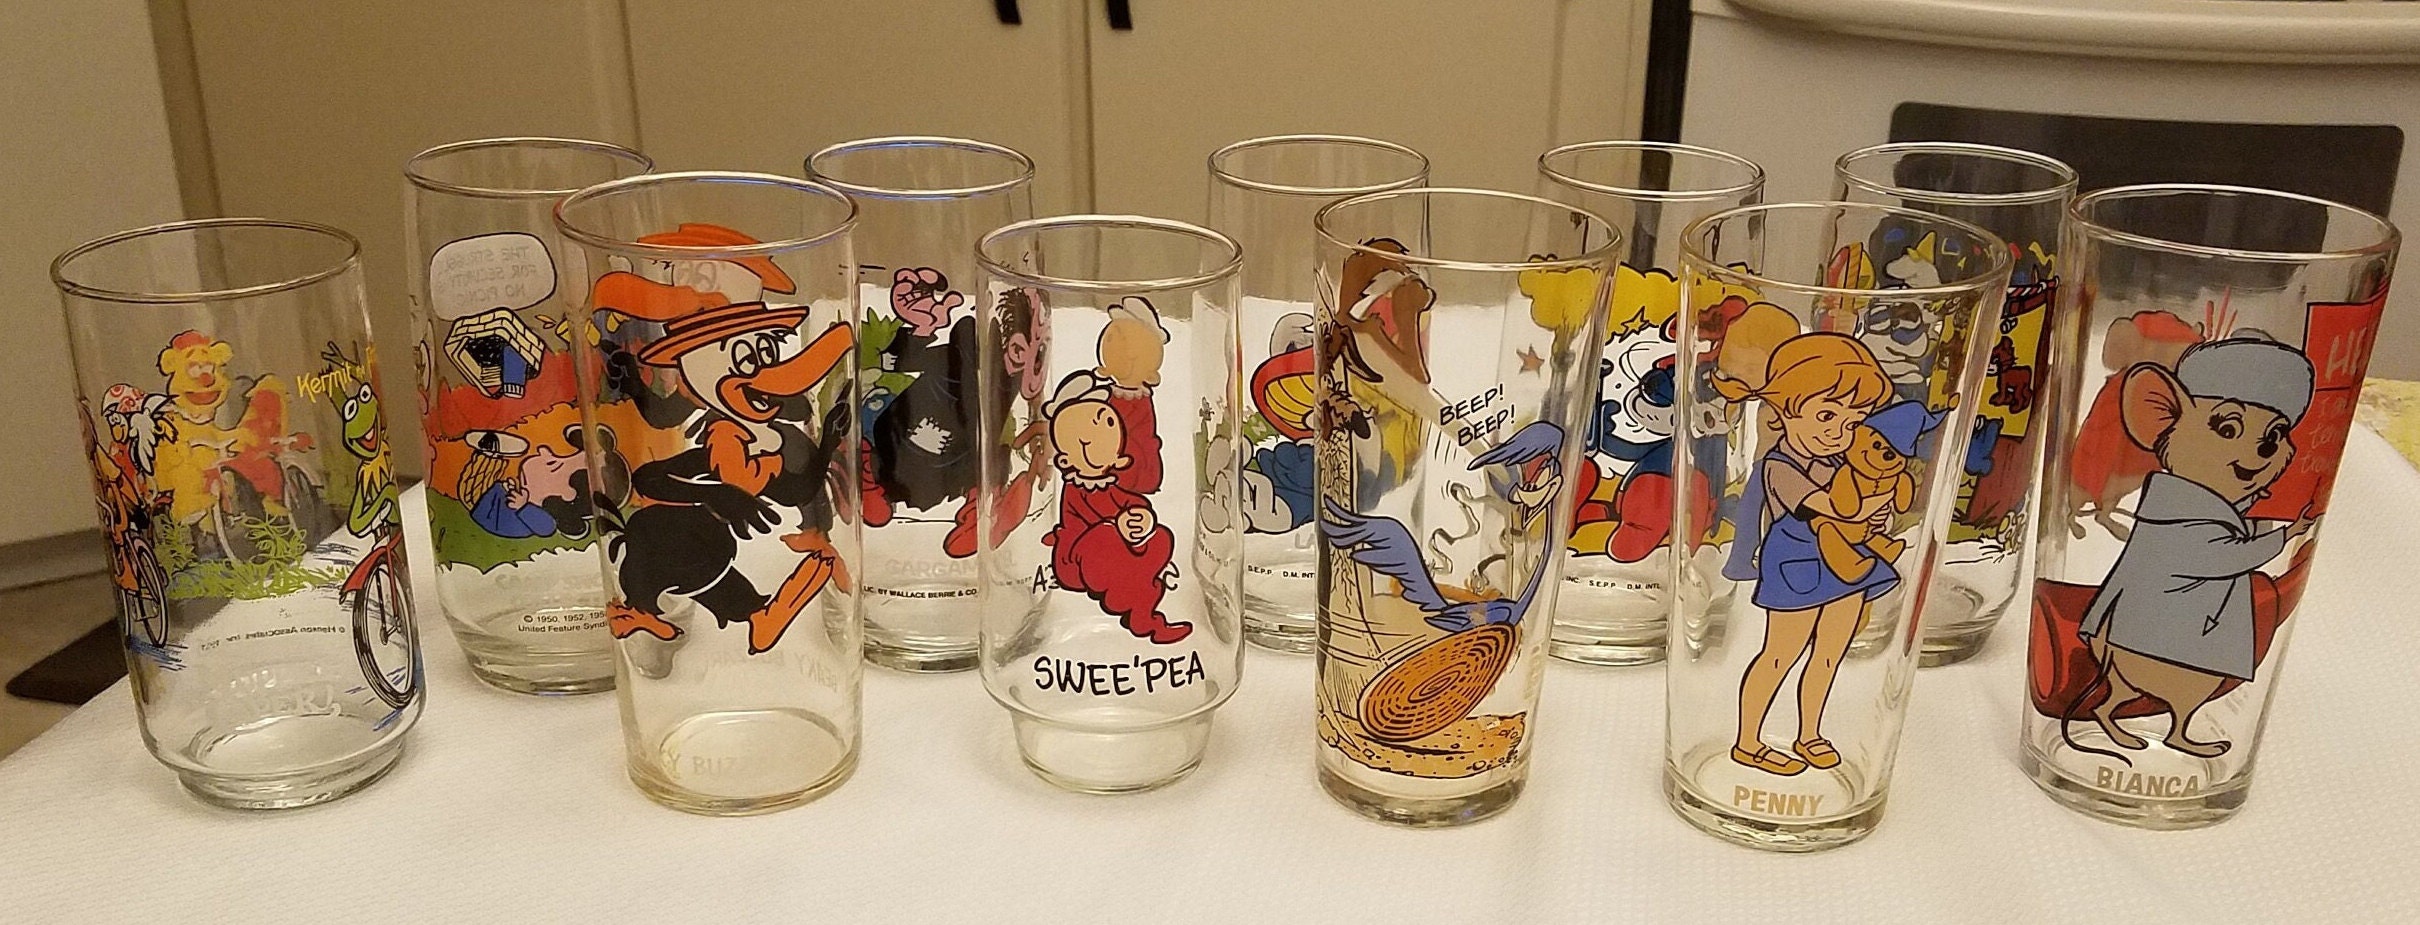 Disney,90s, Glasses,your Choice,coca Cola, Burger King, Iob,movie,disney  Bounding, Character Cups, Glasses 